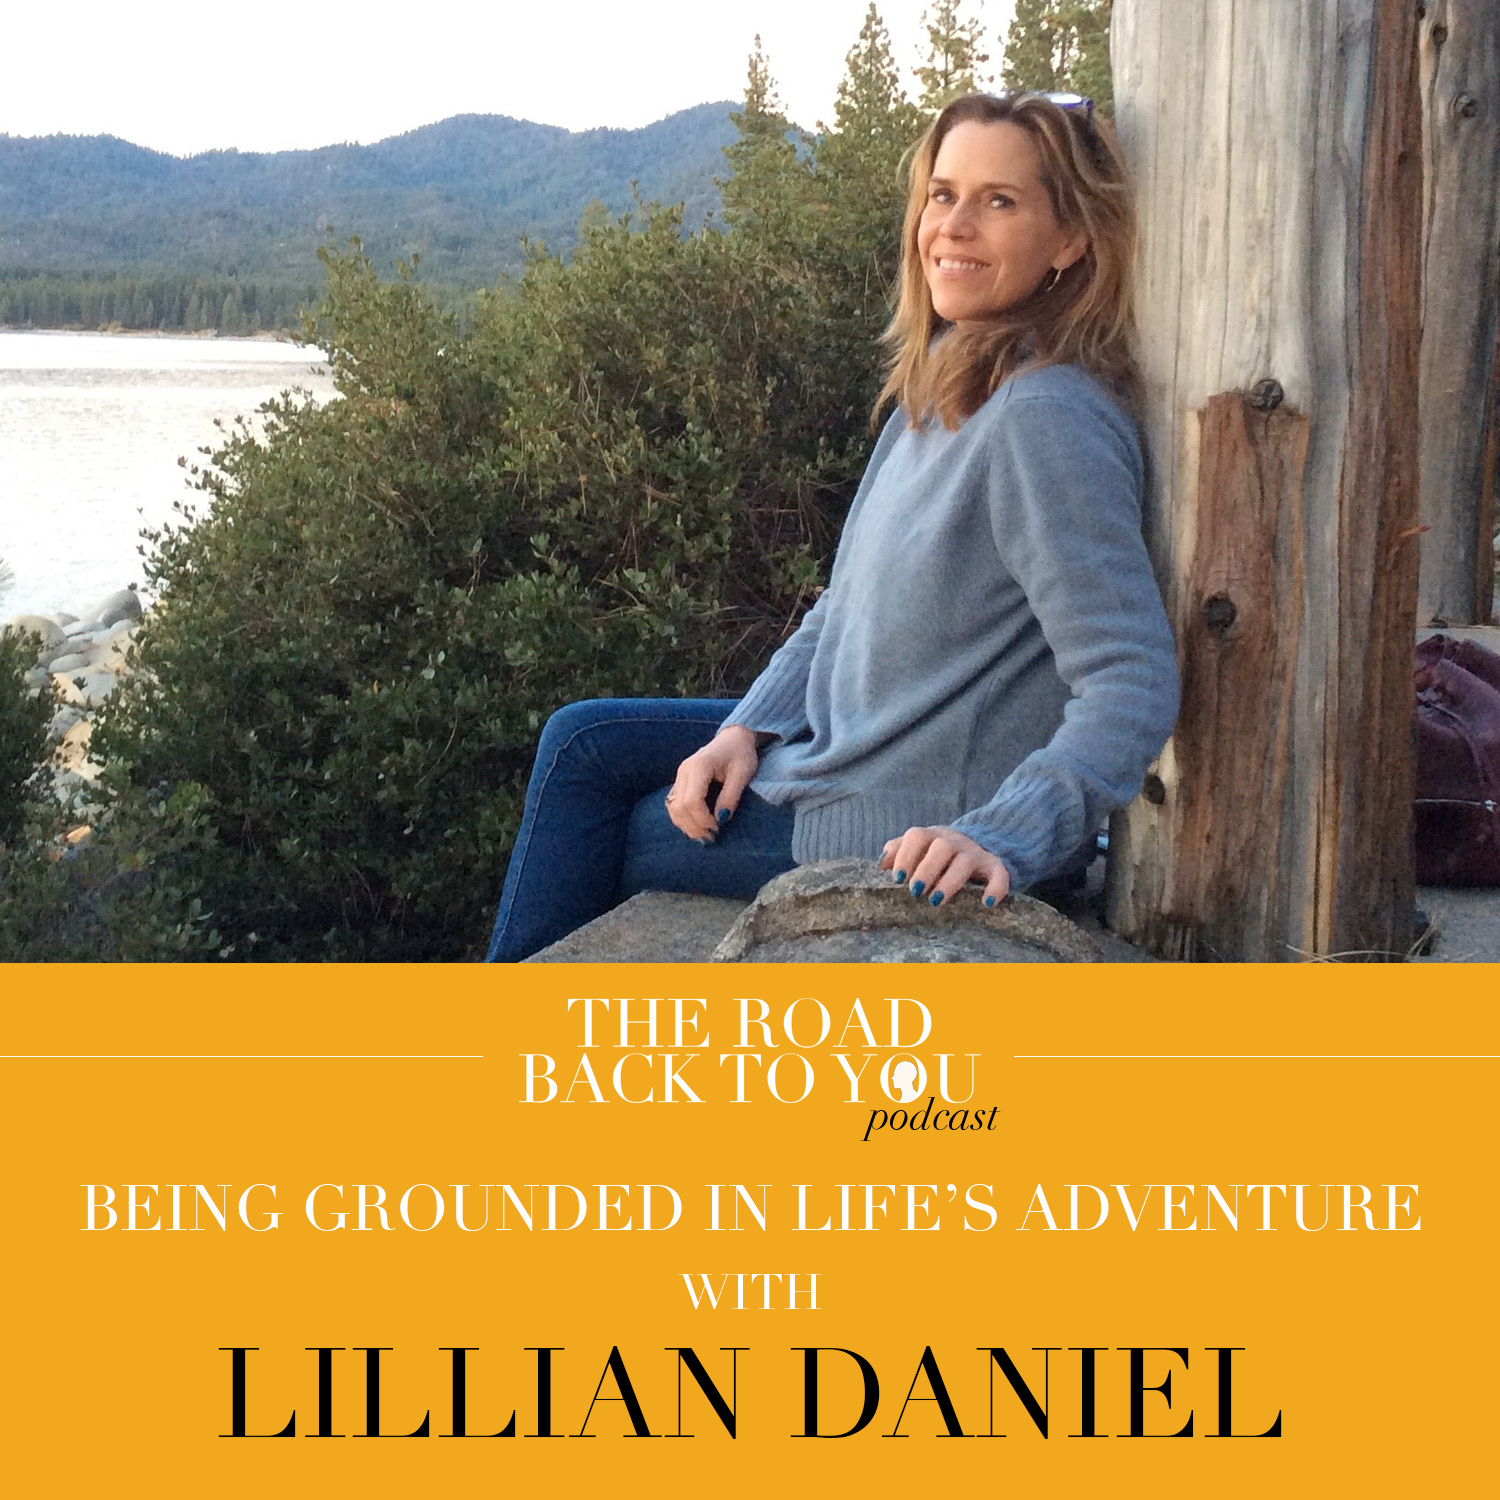 Being Grounded in Life's Adventure with Lillian Daniel, Enneagram 7 (The Enthusiast) - Episode 28